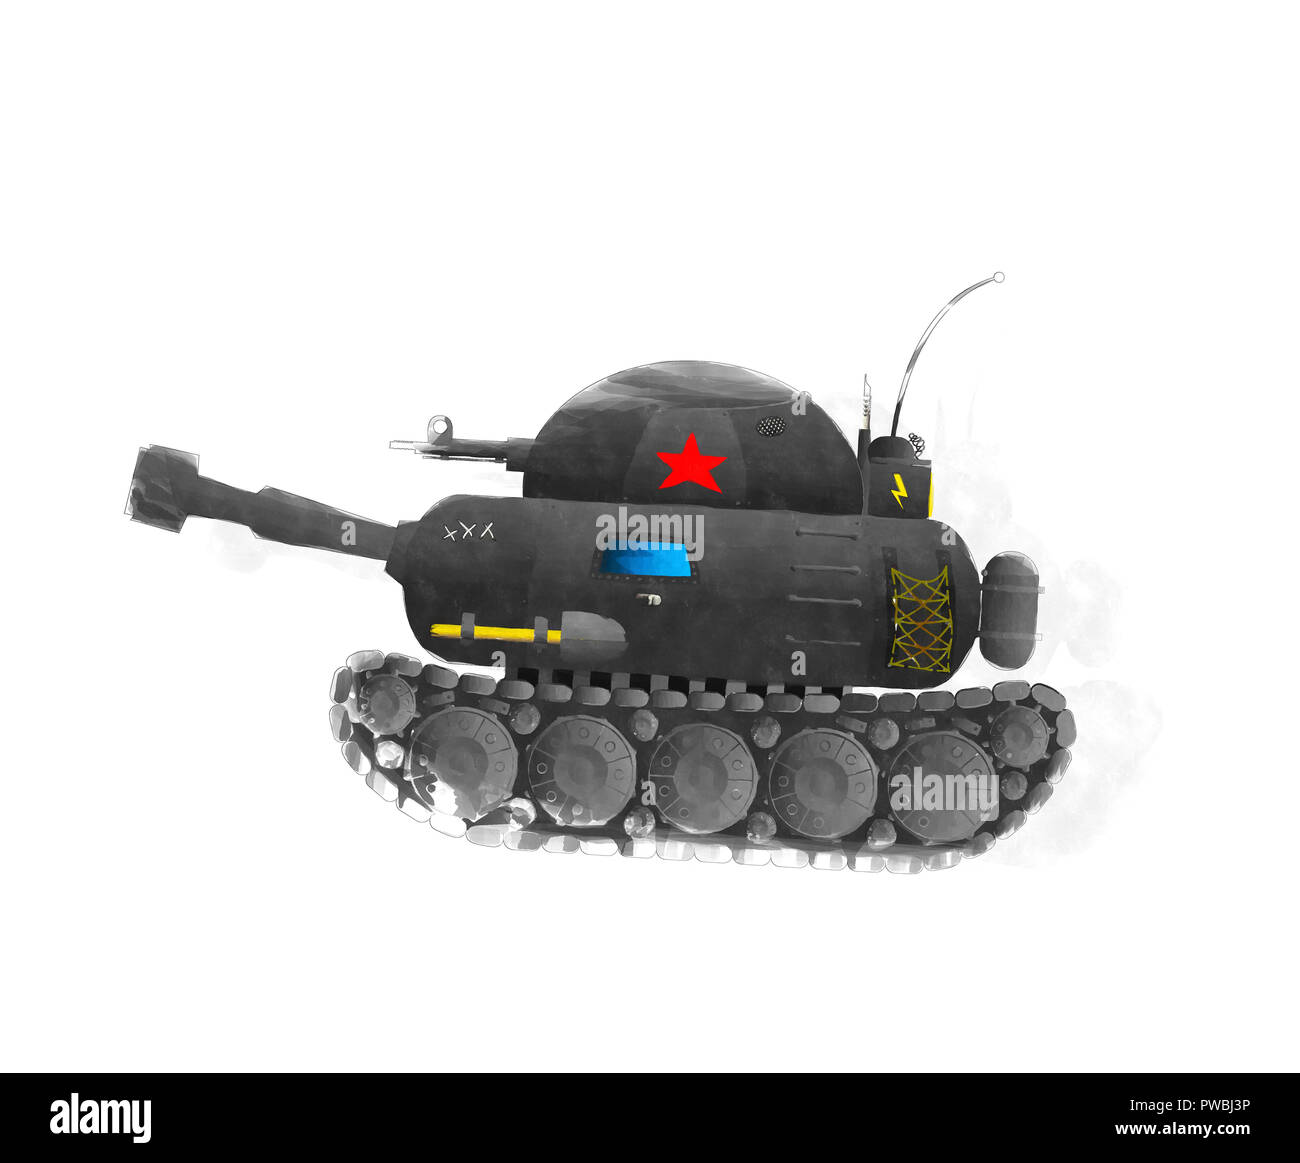 Aquarelle toy tank over white background Banque D'Images